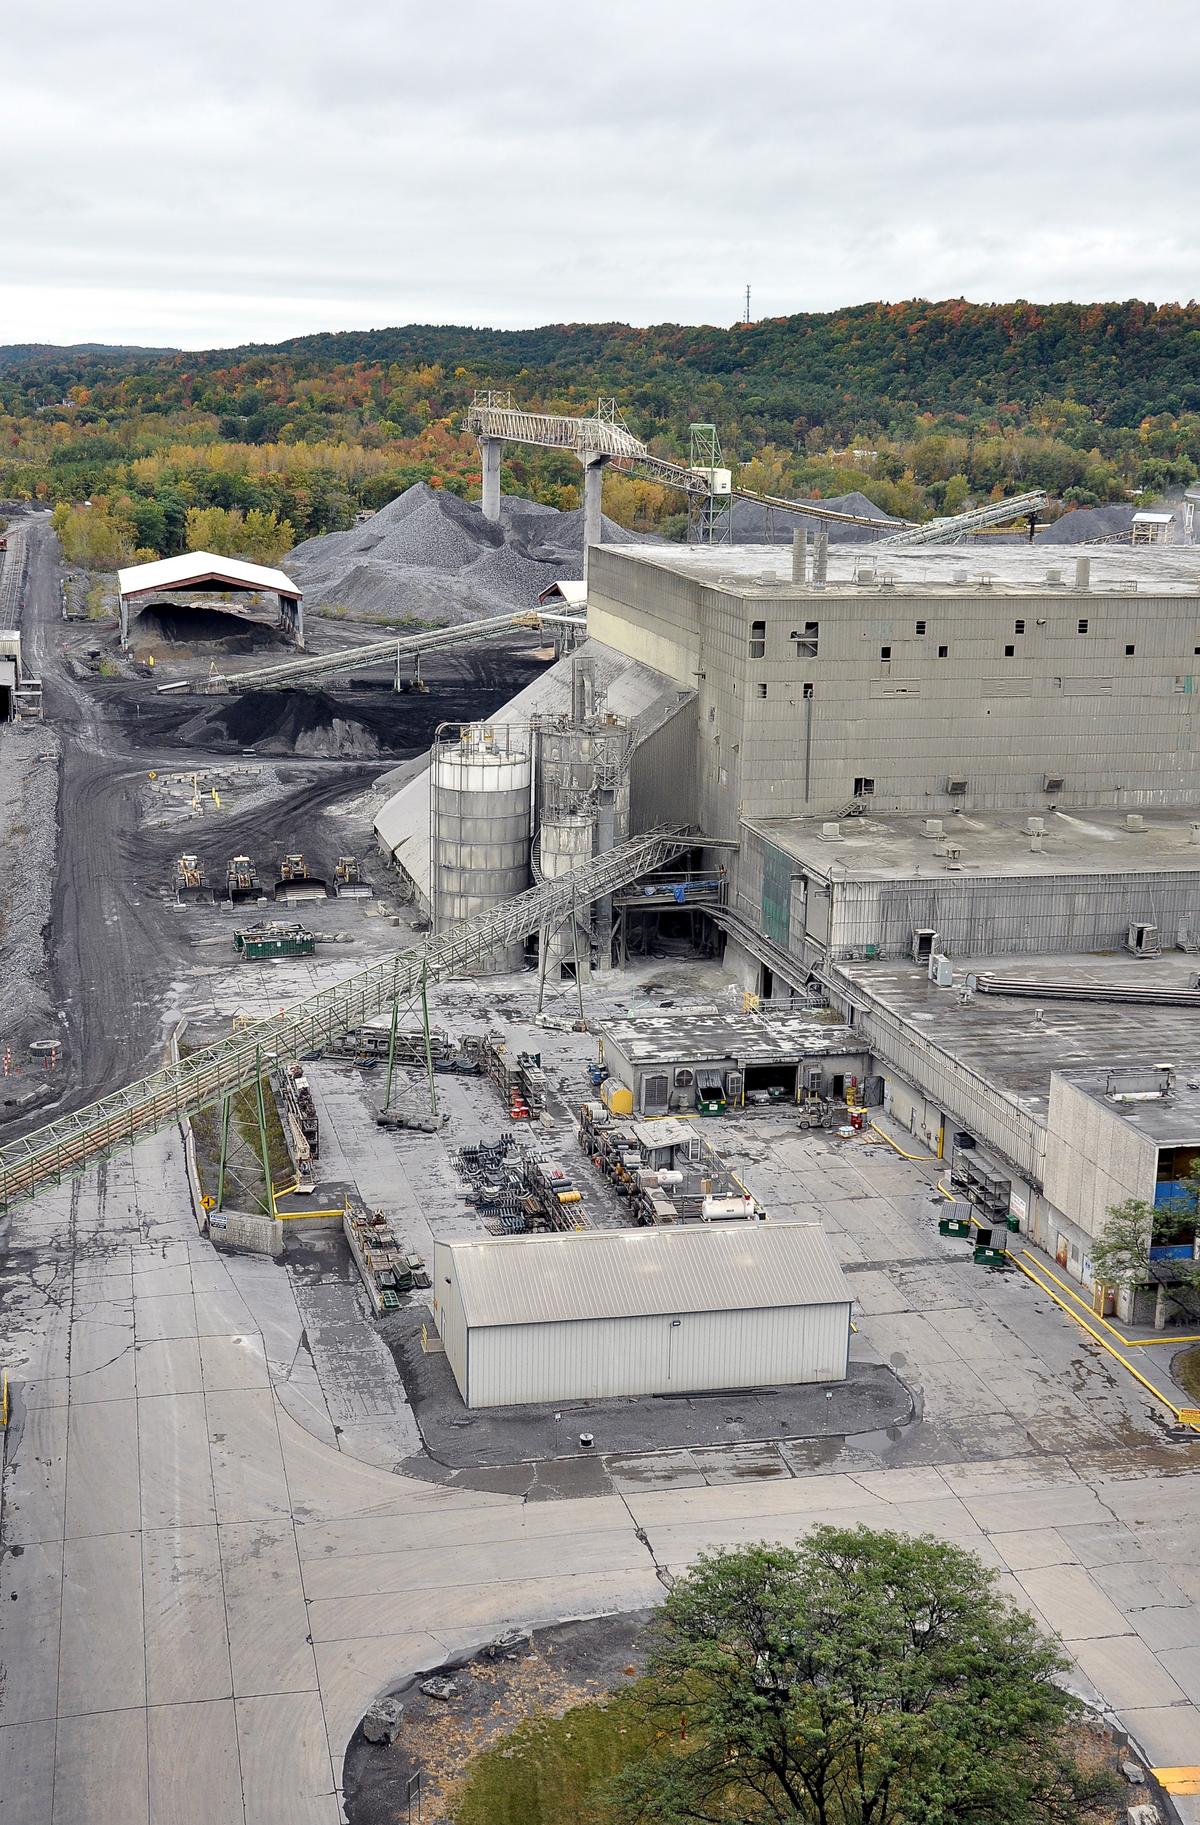 Lafarge finally firing up overhaul of cement plant - Albany Business Review